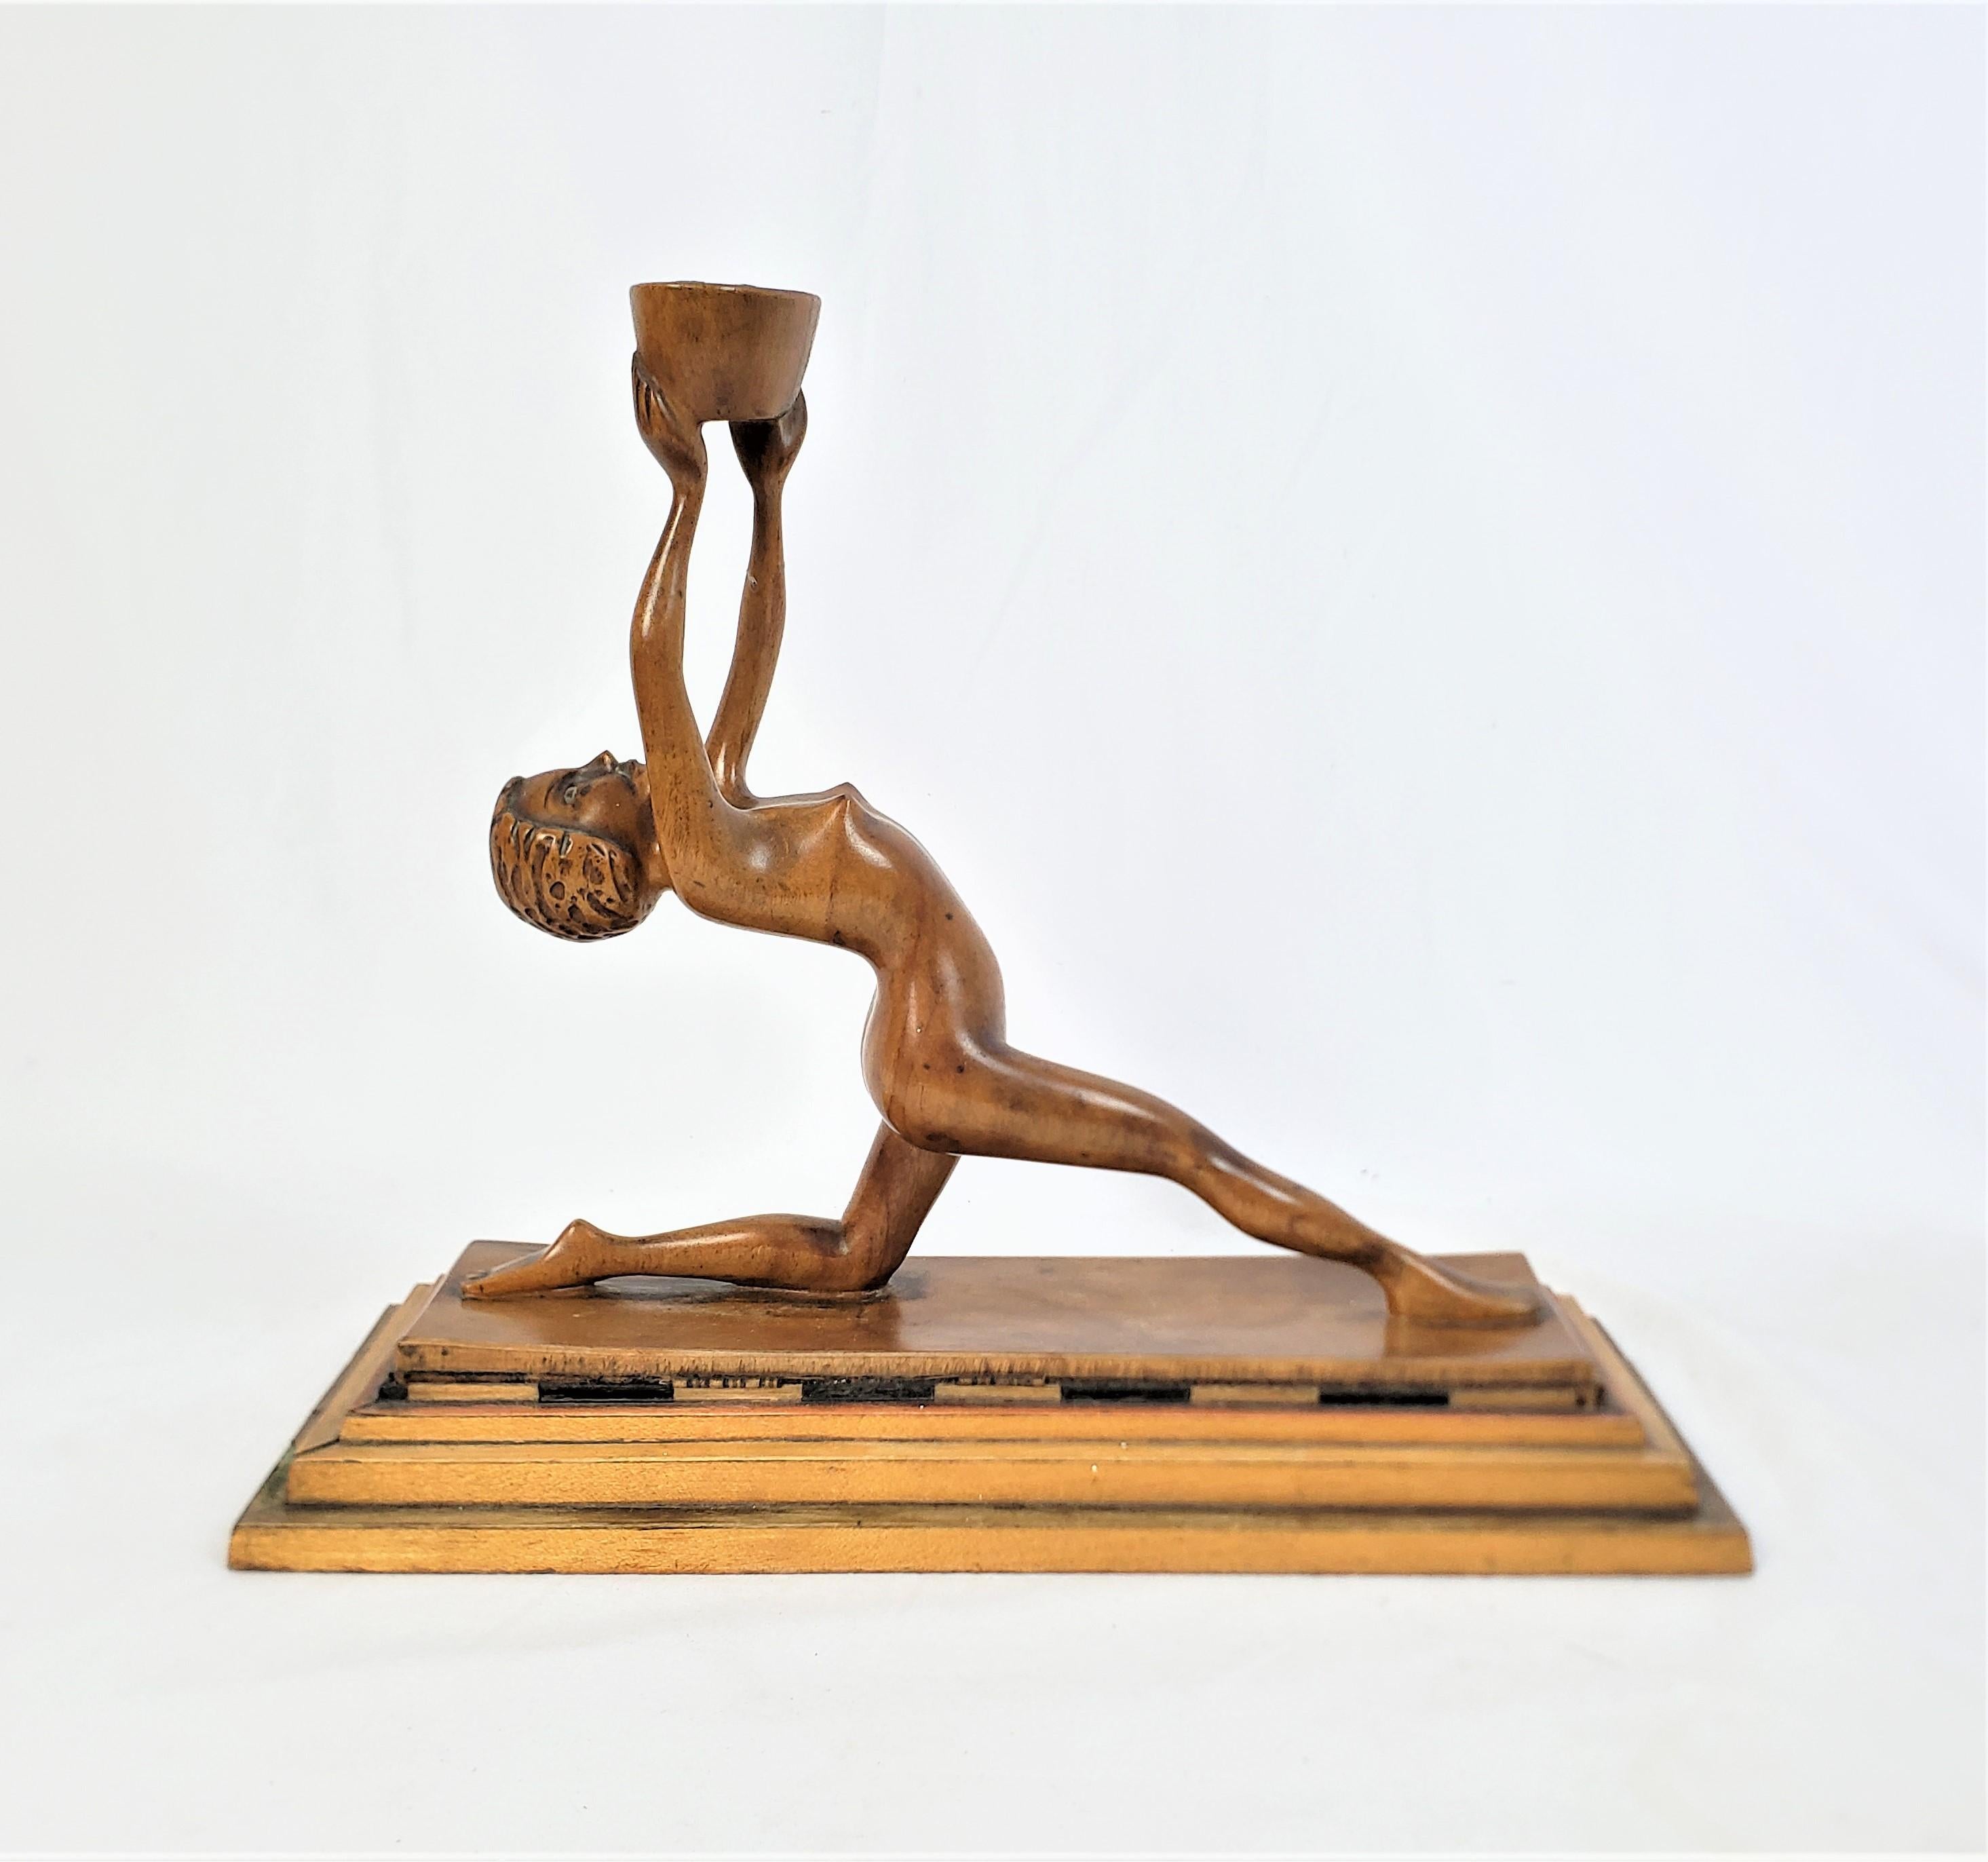 Softwood Antique Art Deco Hand-Carved Wooden Sculpture of a Nude Female Holding a Basket For Sale